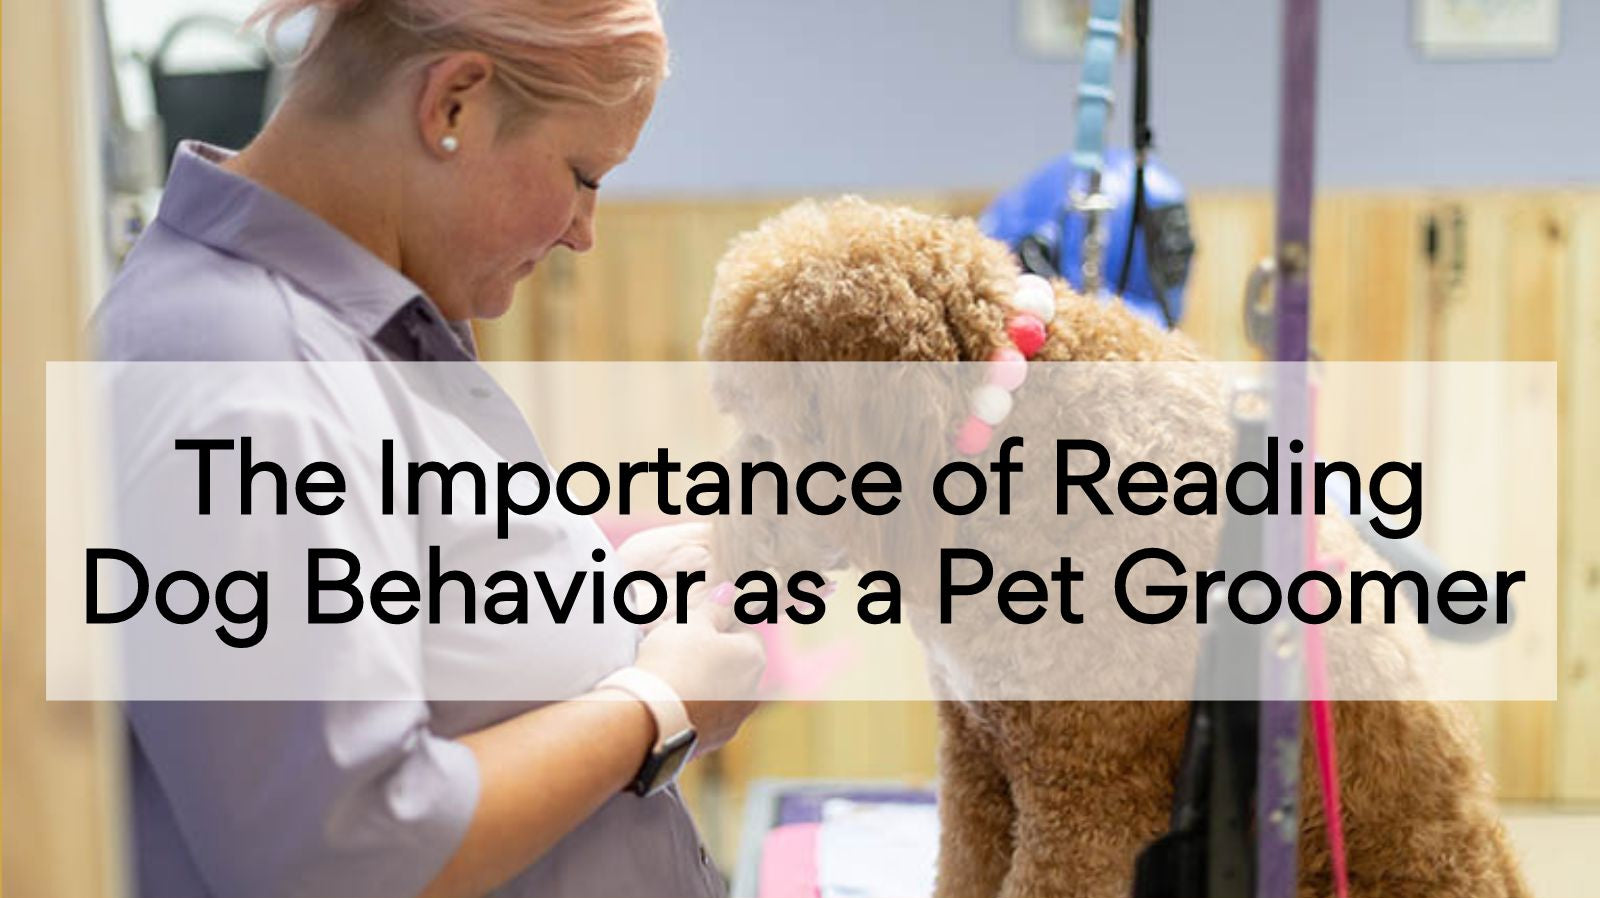 The Importance of Reading Dog Behavior as a Pet Groomer